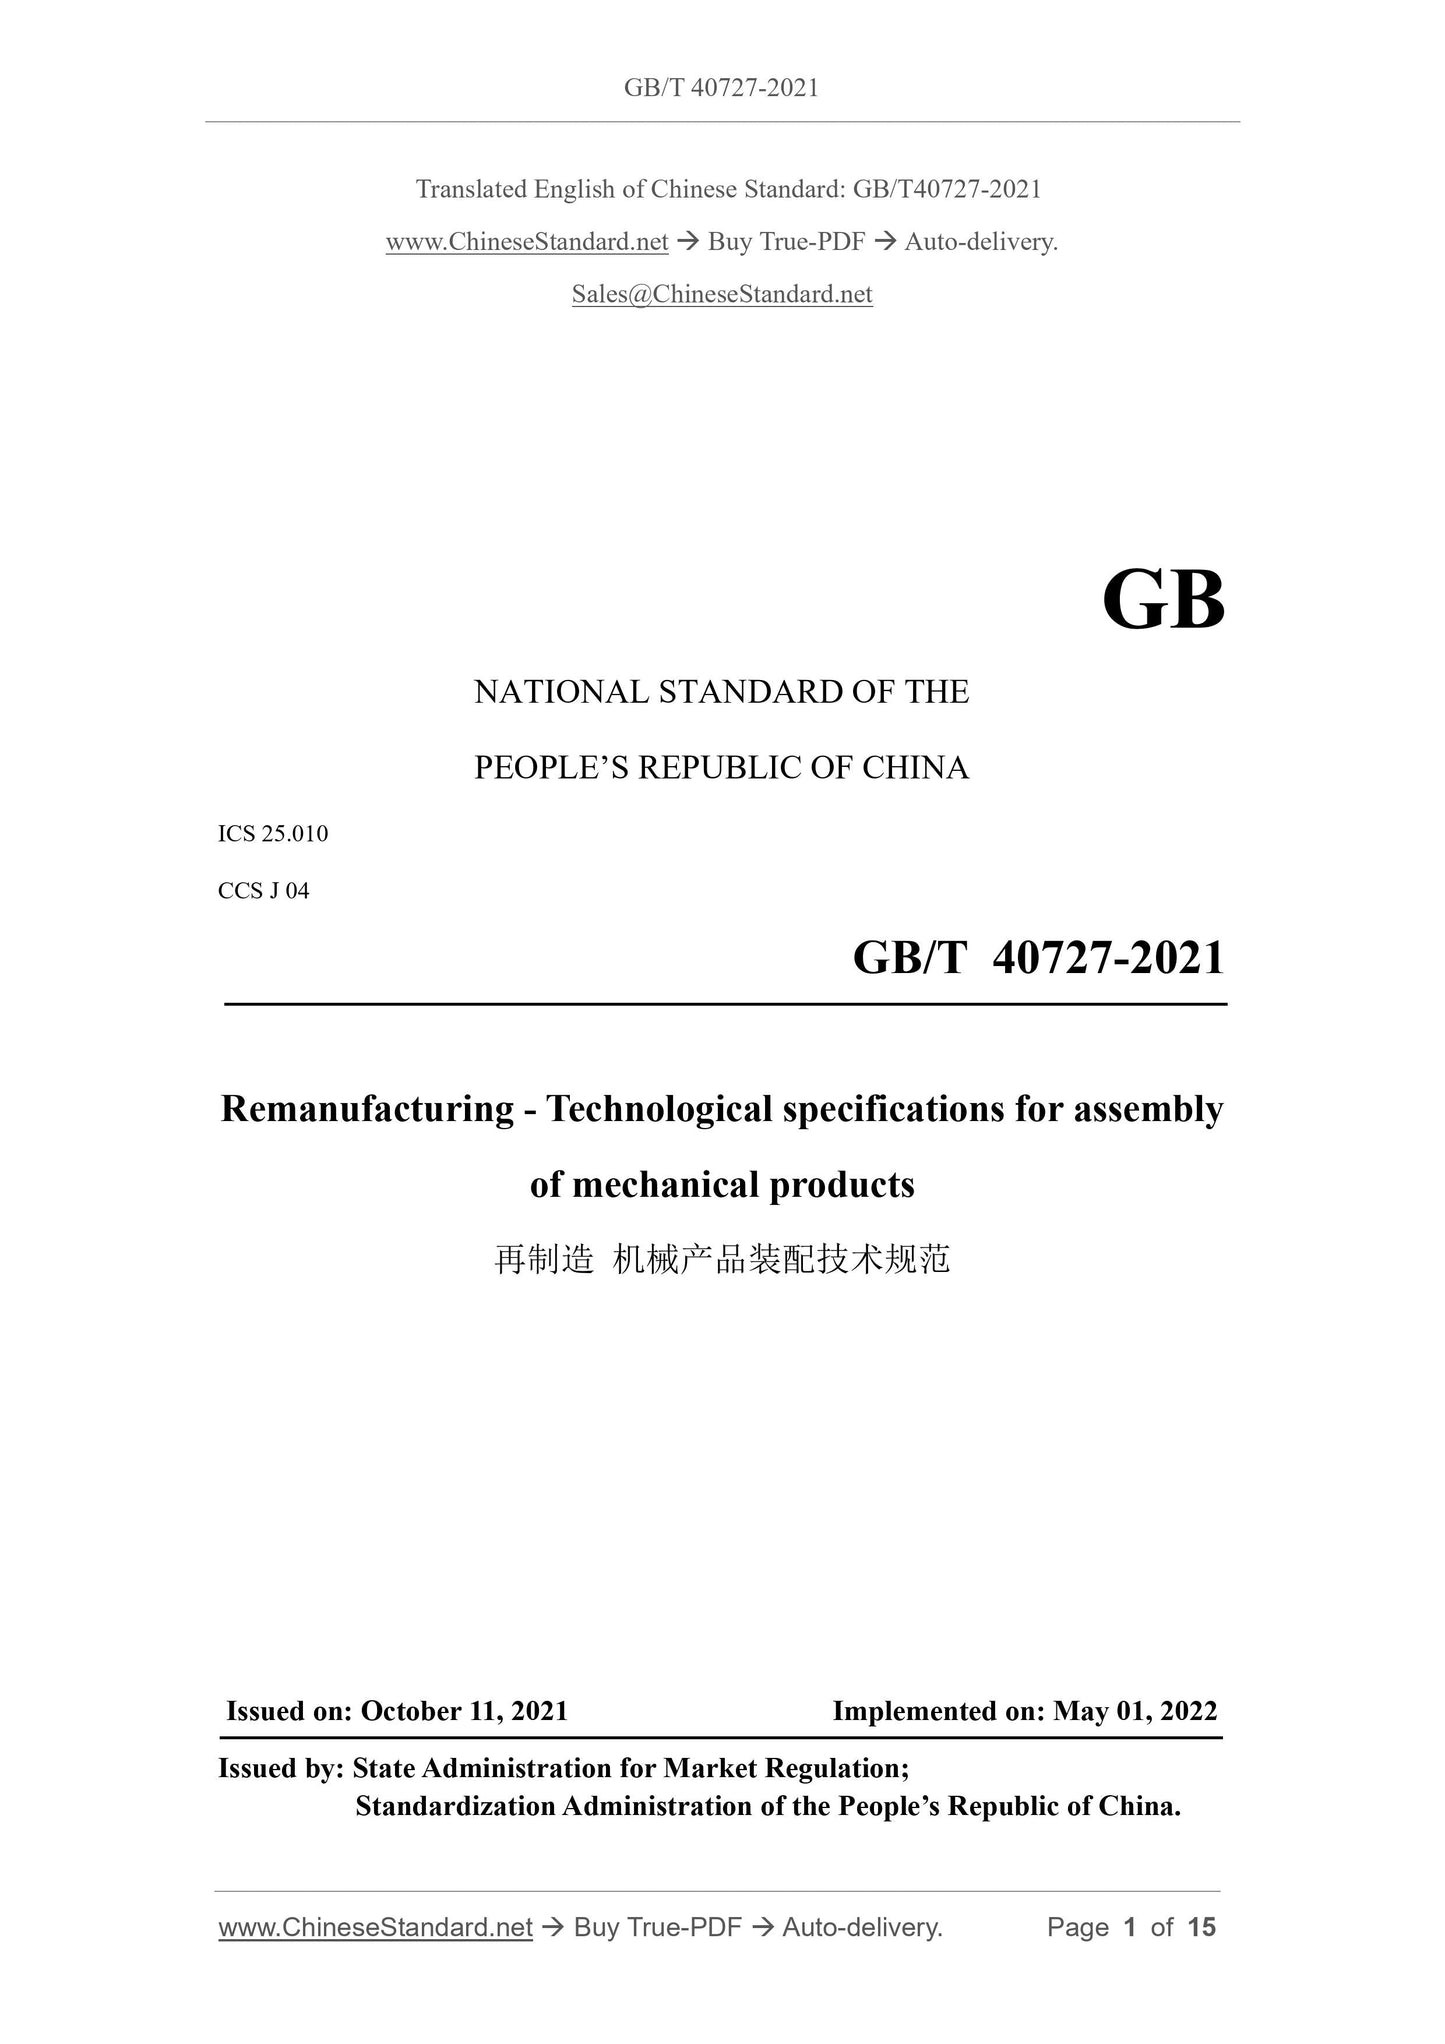 GB/T 40727-2021 Page 1